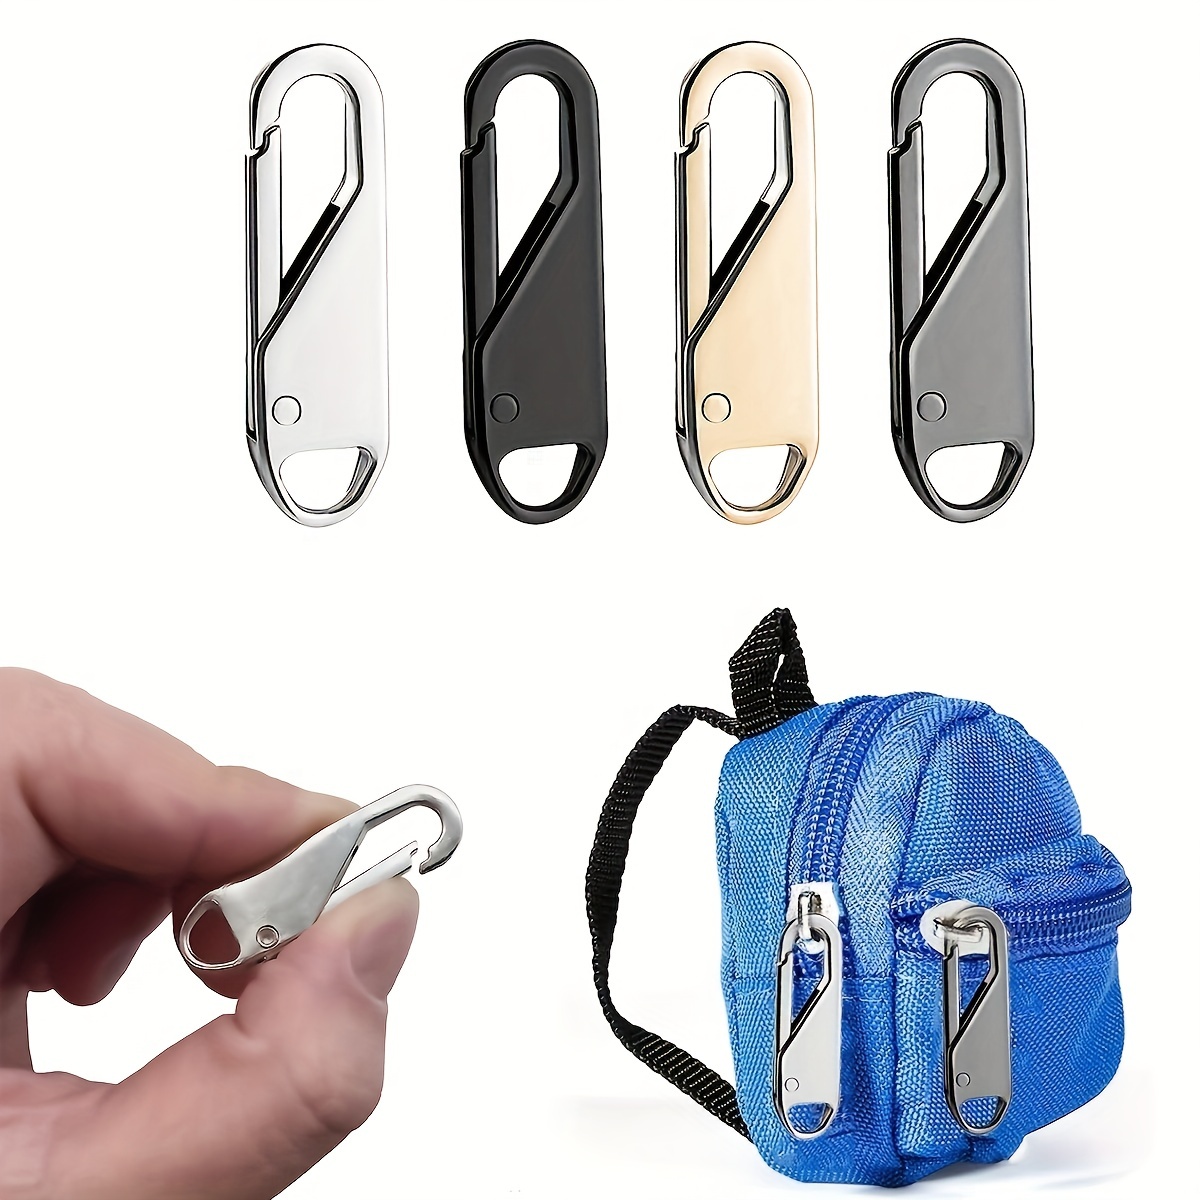  6pcs Zipper Pull Replacement, Zipper Part Replacement  Detachable Metal Zipper Pull Tabs Zipper Tags Cord Pulls for Most  Items-Purse Backpack Jacket Boots Jeans Coat Suitcase Luggage Dresses  (Bronze)